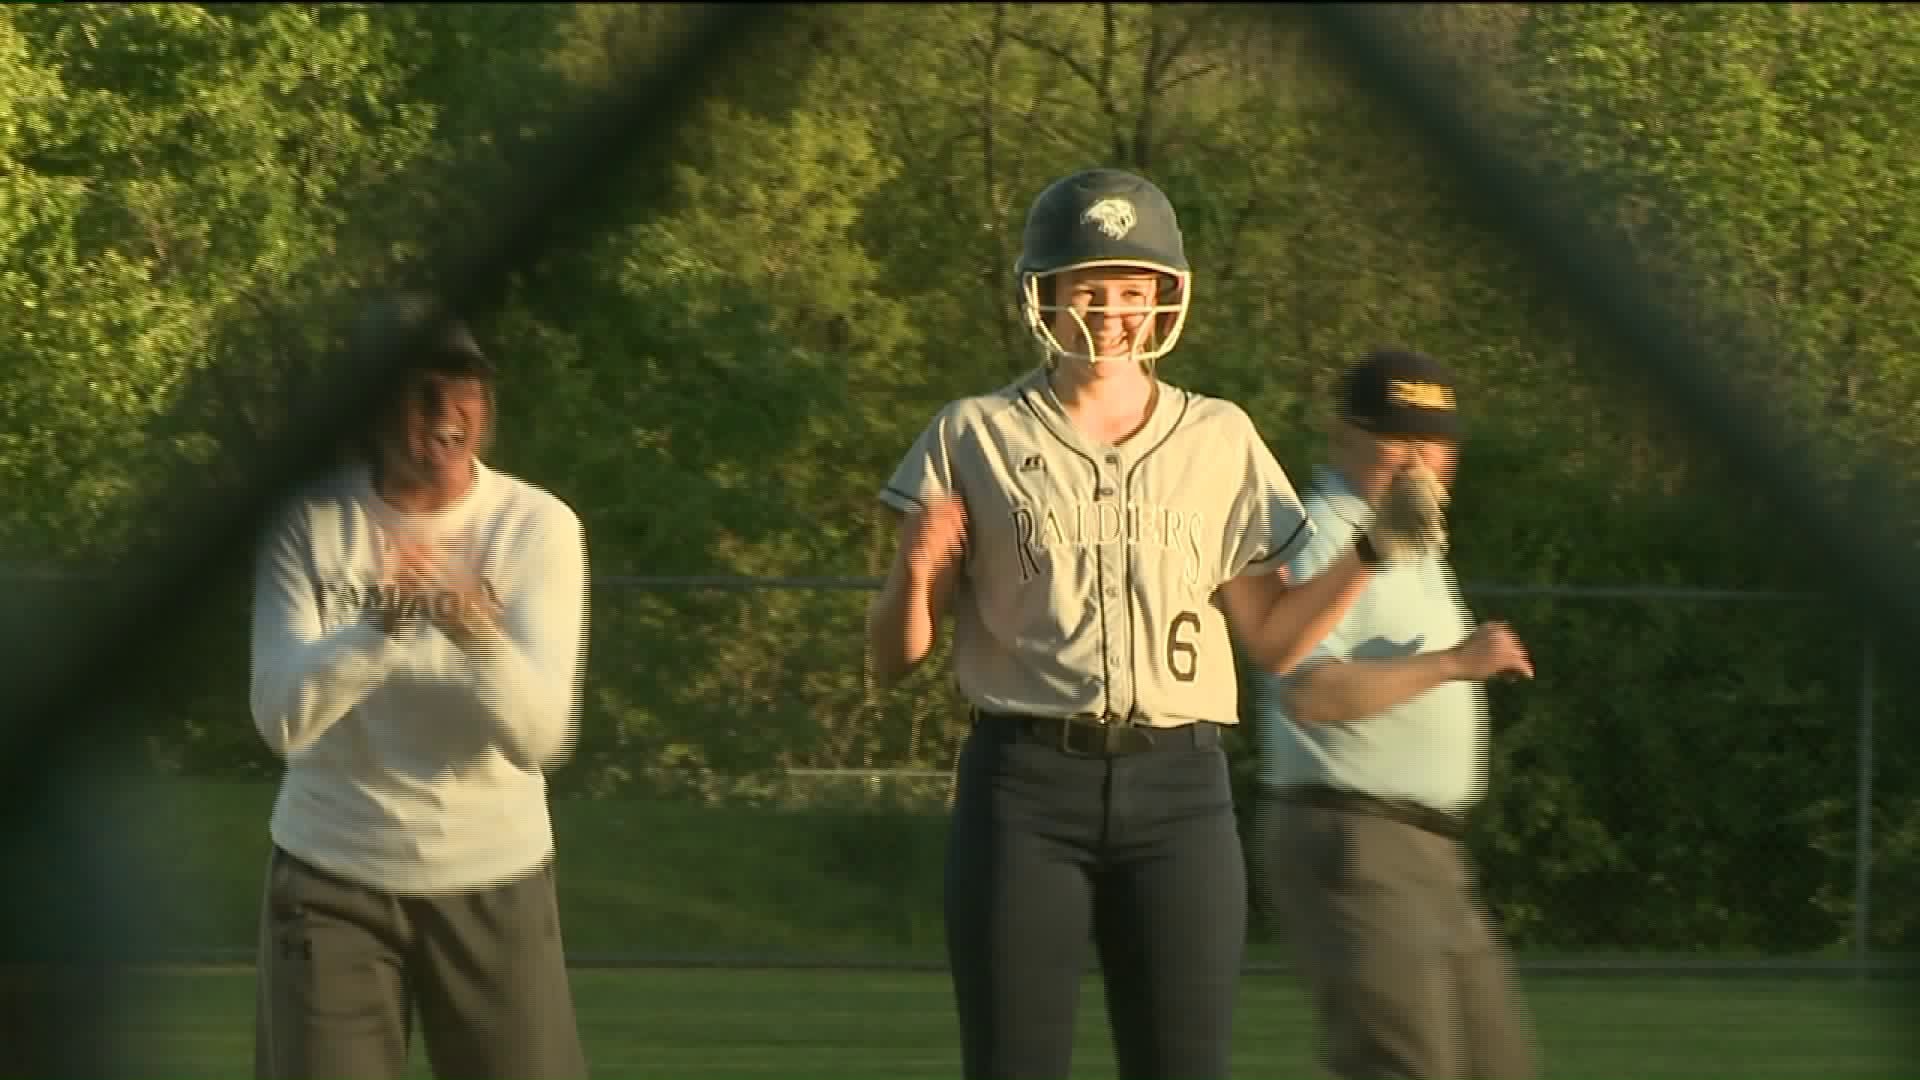 Tamaqua Knocks Out Minersville in Schuylkill Softball Semifinals